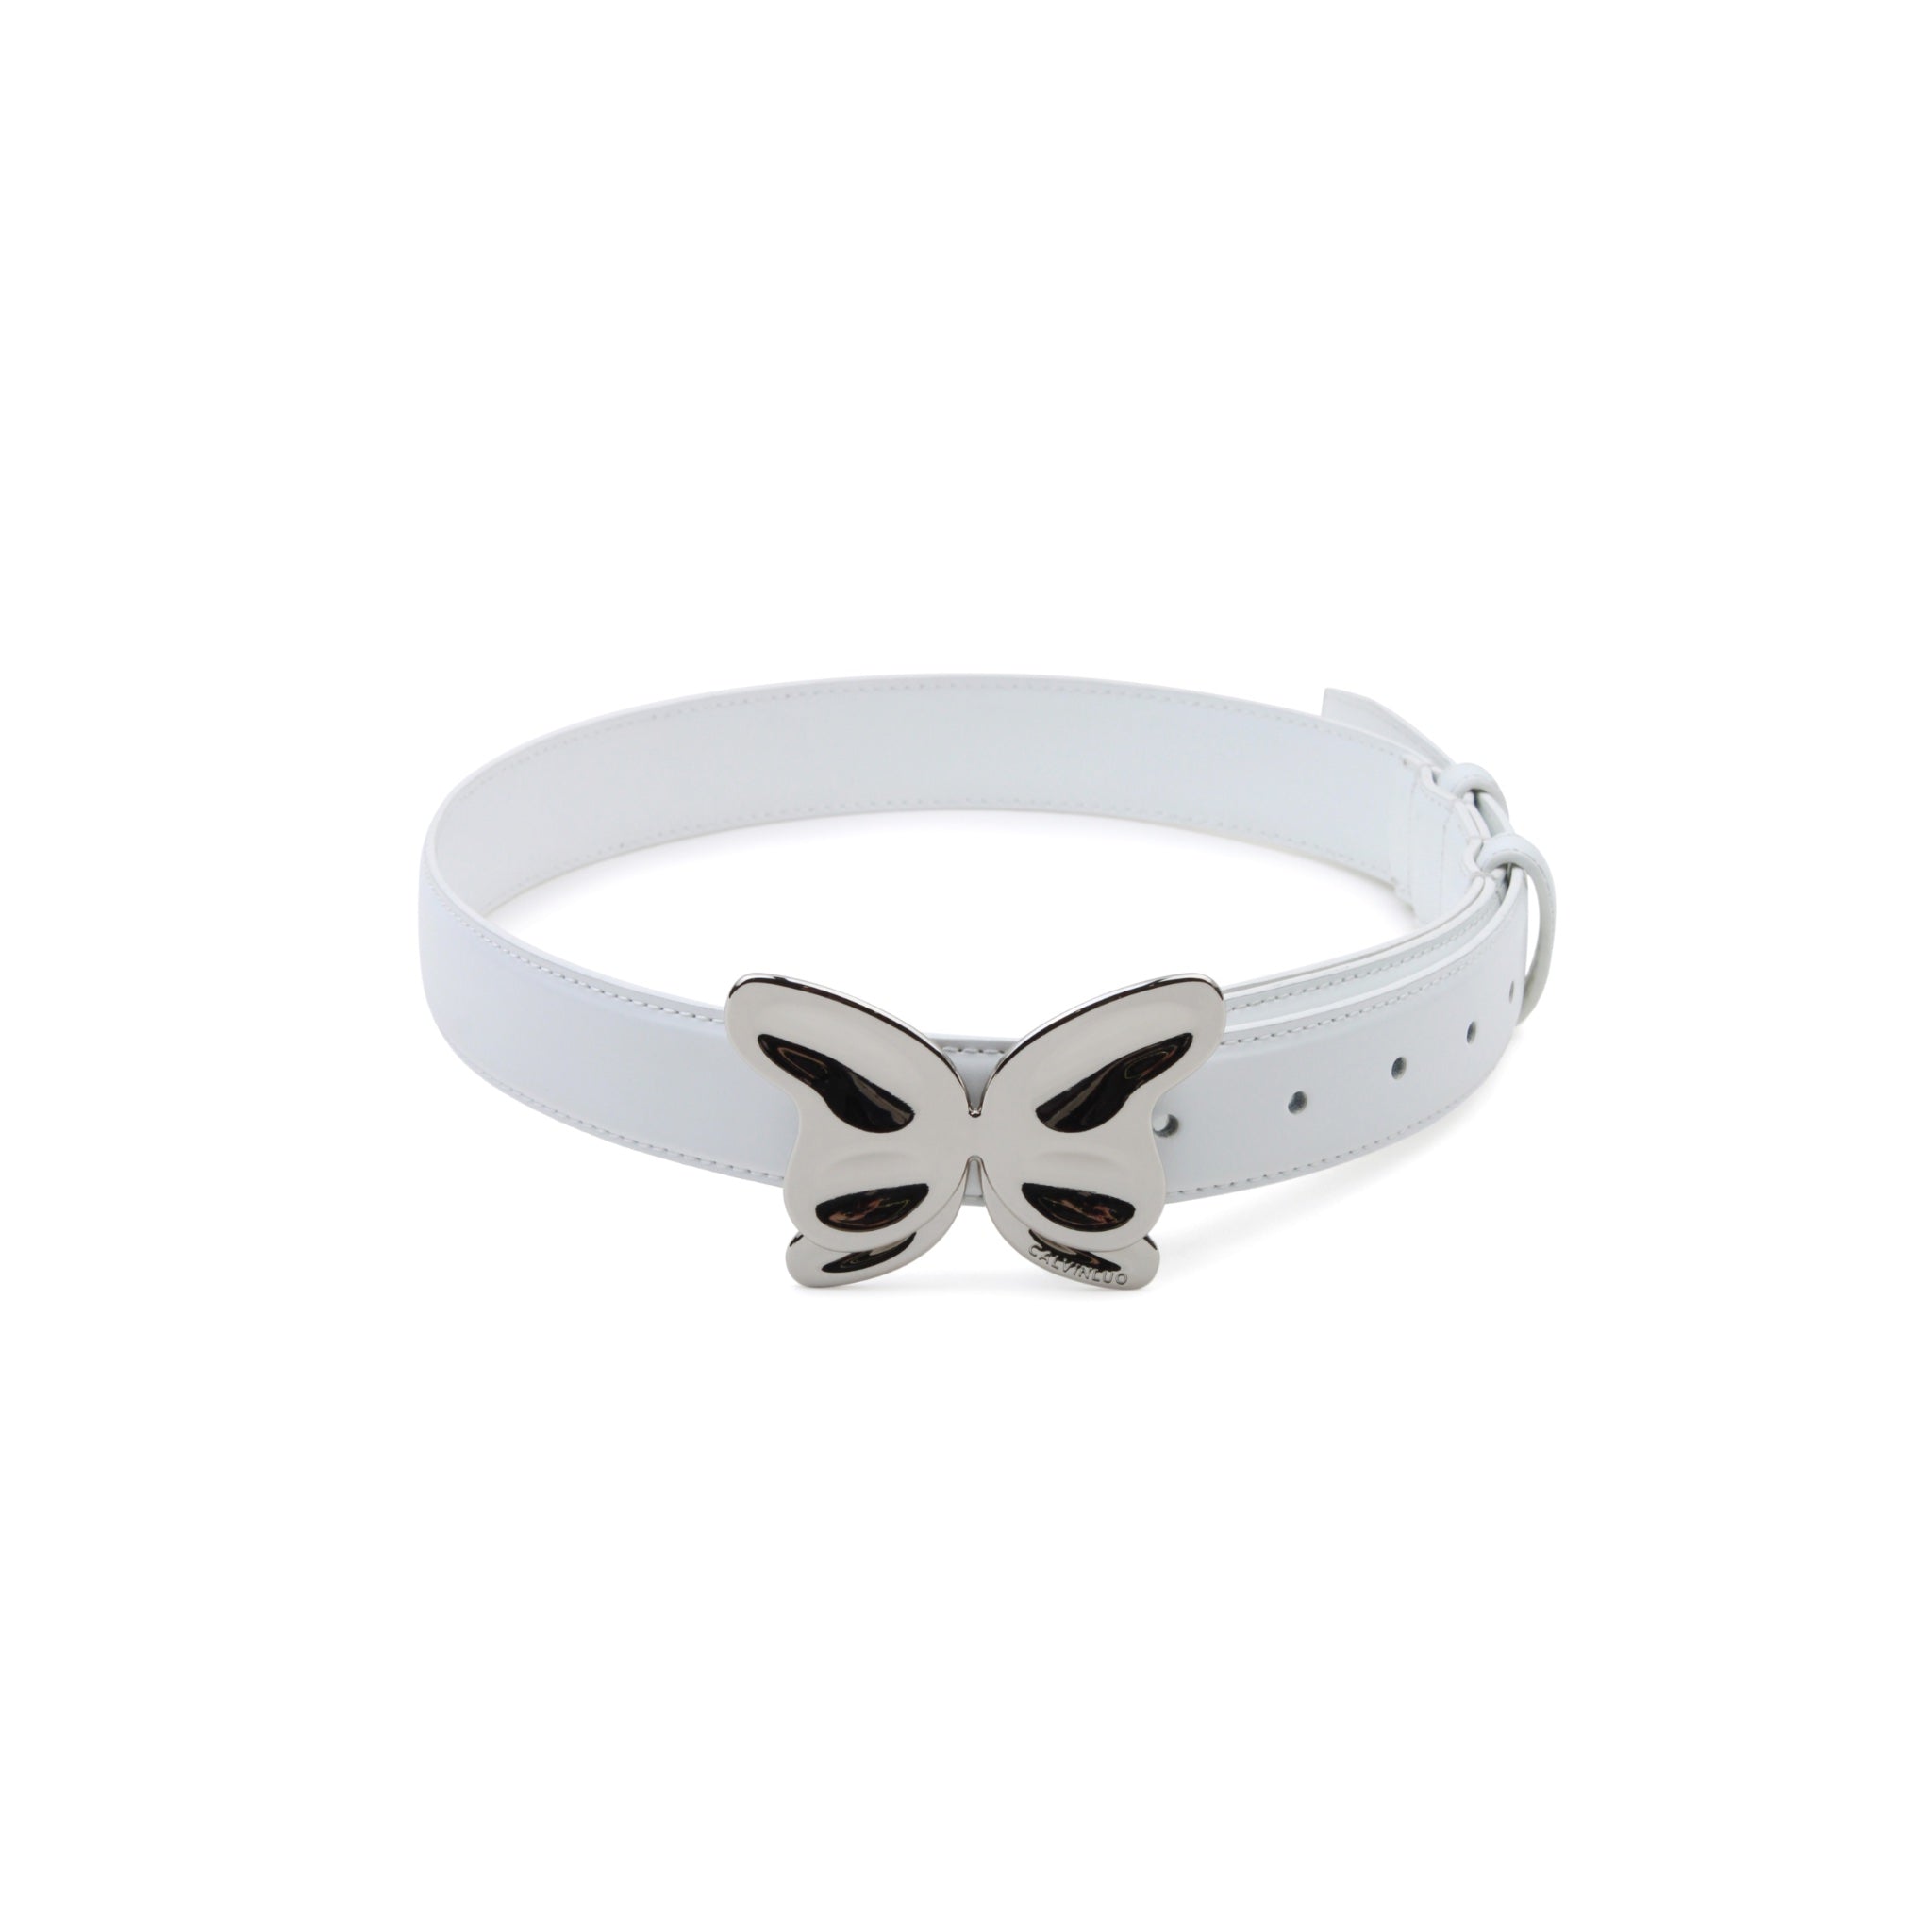 CALVIN LUO White Butterfly Decorative Belt | MADA IN CHINA